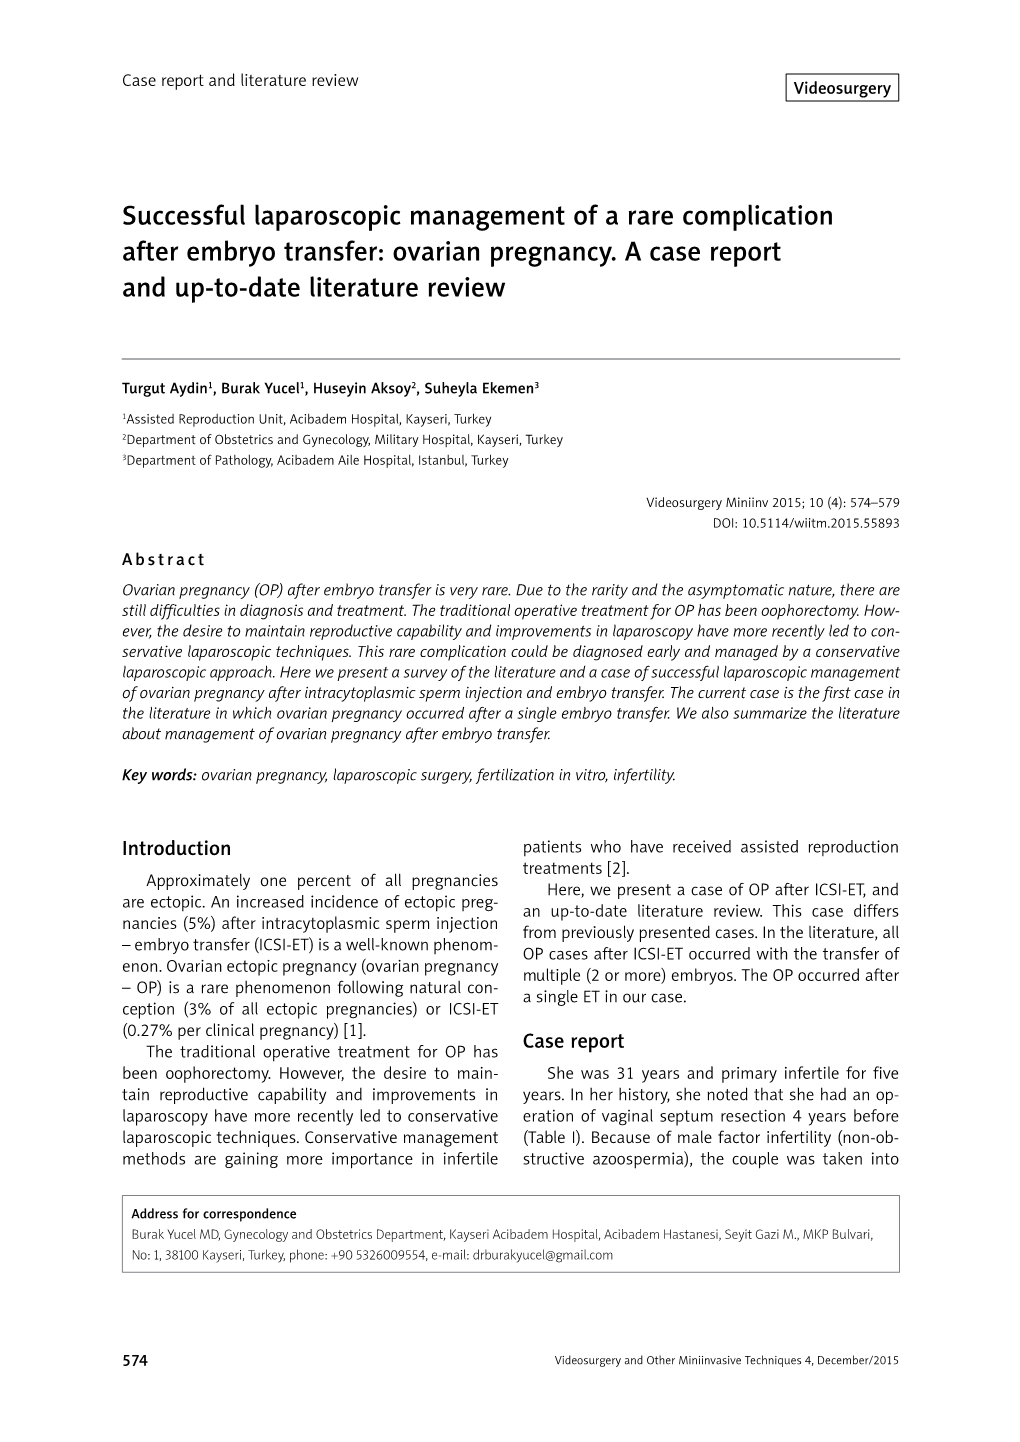 Successful Laparoscopic Management of a Rare Complication After Embryo Transfer: Ovarian Pregnancy